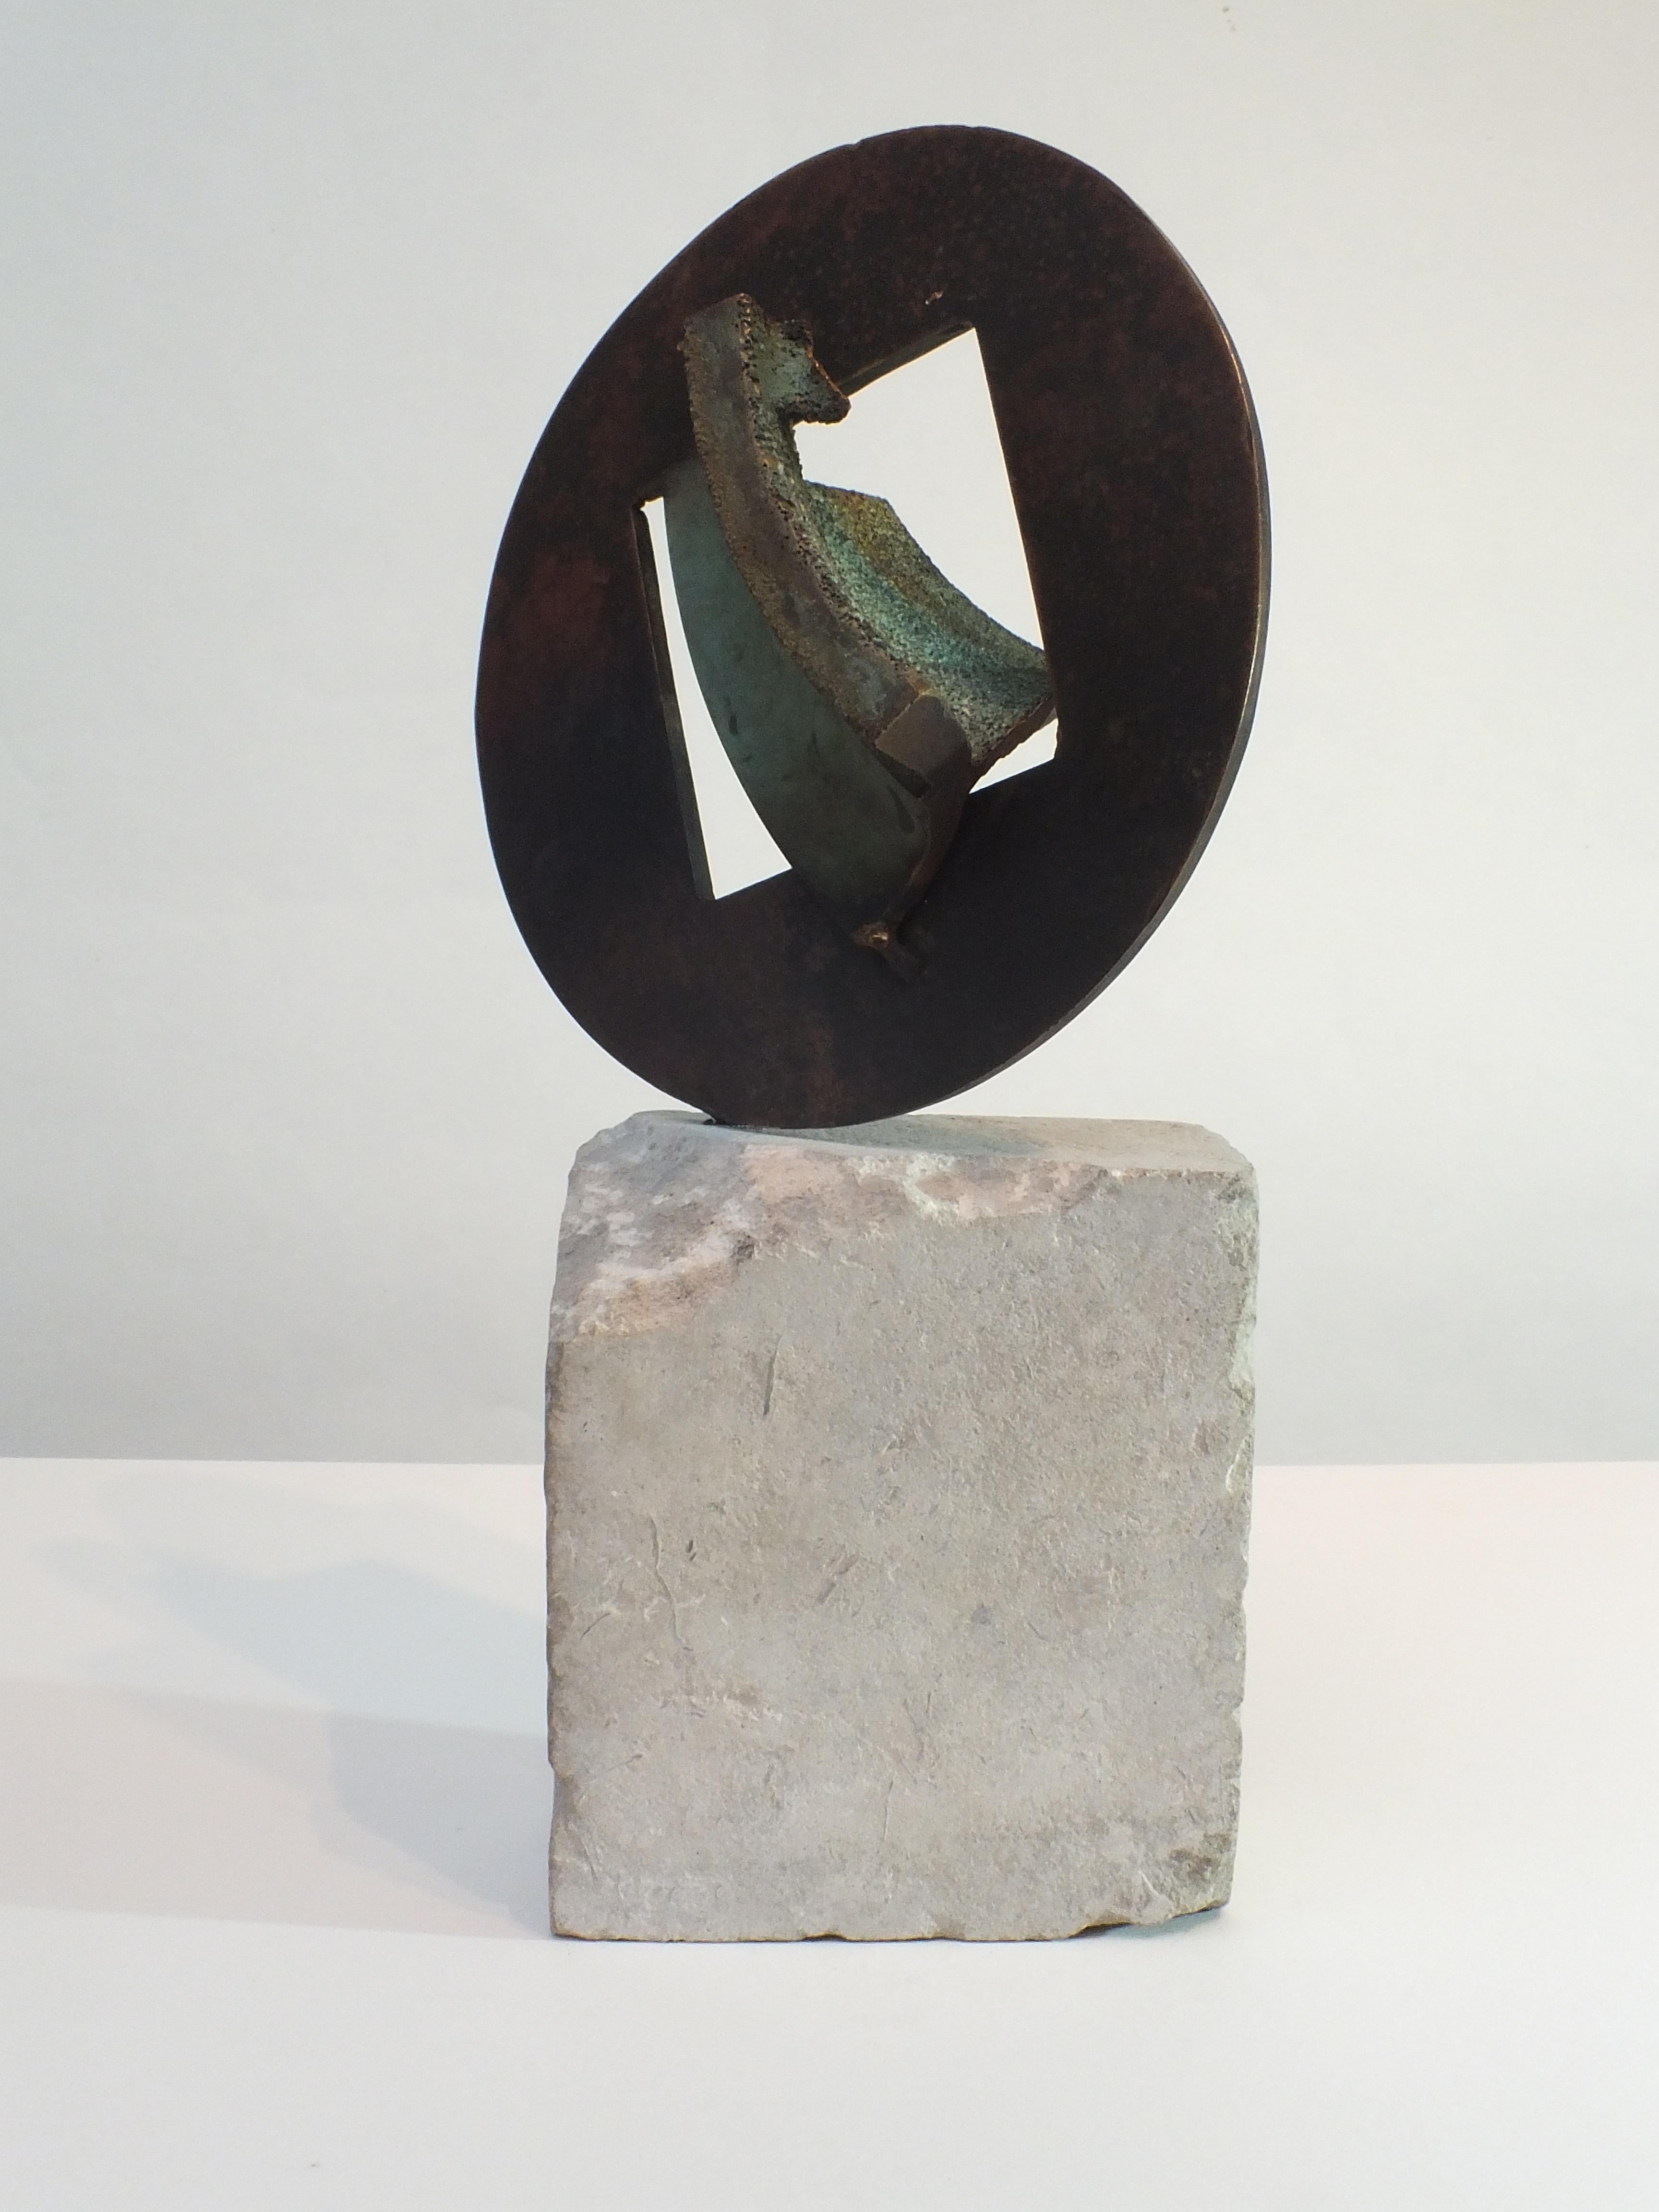 A beautiful bronze reflecting the way Rawlin's likes to work with interchangeable artistic views of subjects that are familiar to us. He puts a different slant on a formed item & a natural item. This is a really tactile piece of bronze